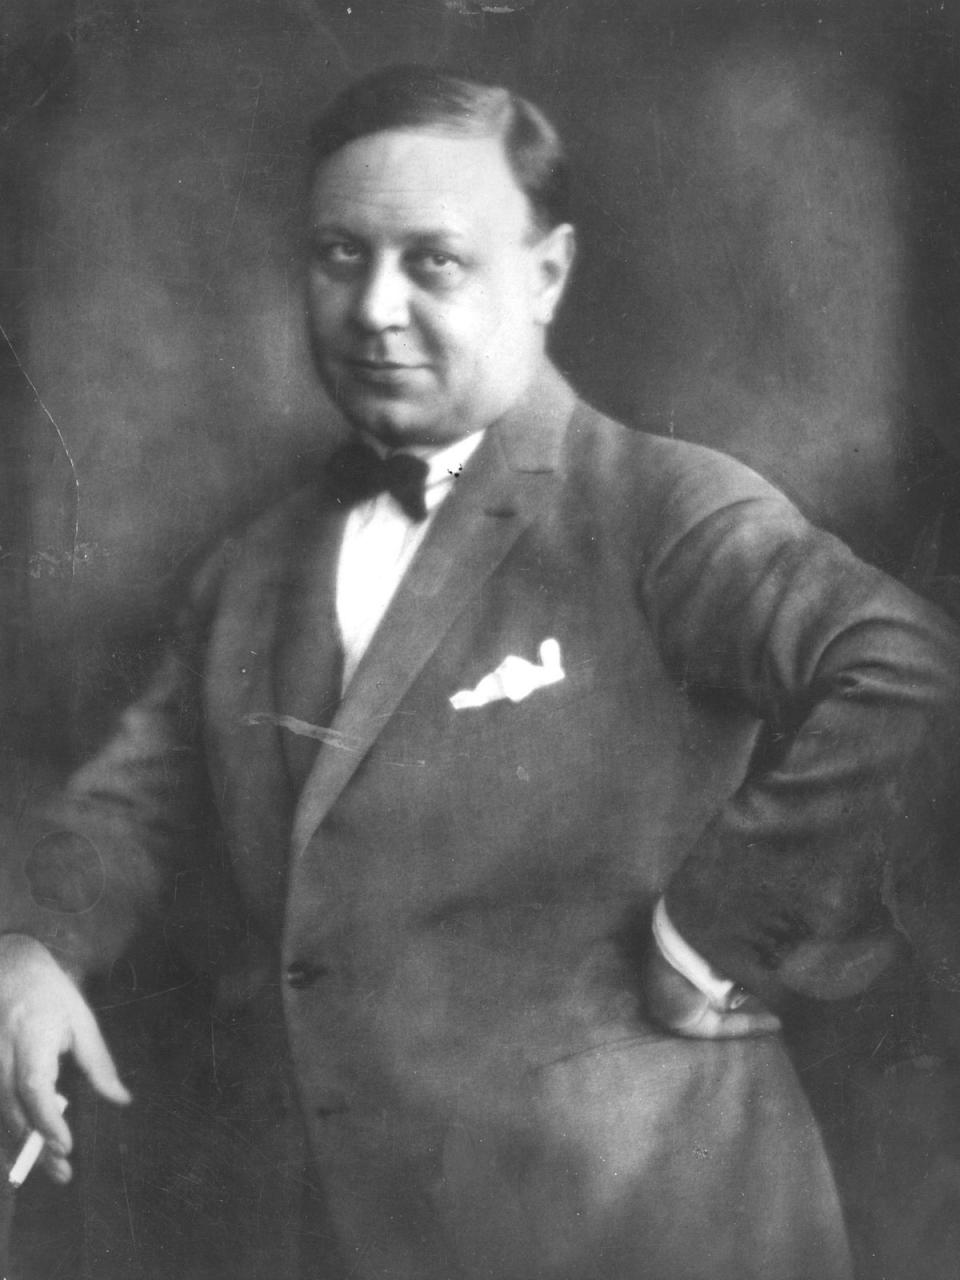 A portrait of Emil Jannings, circa 1930 (Getty Images)